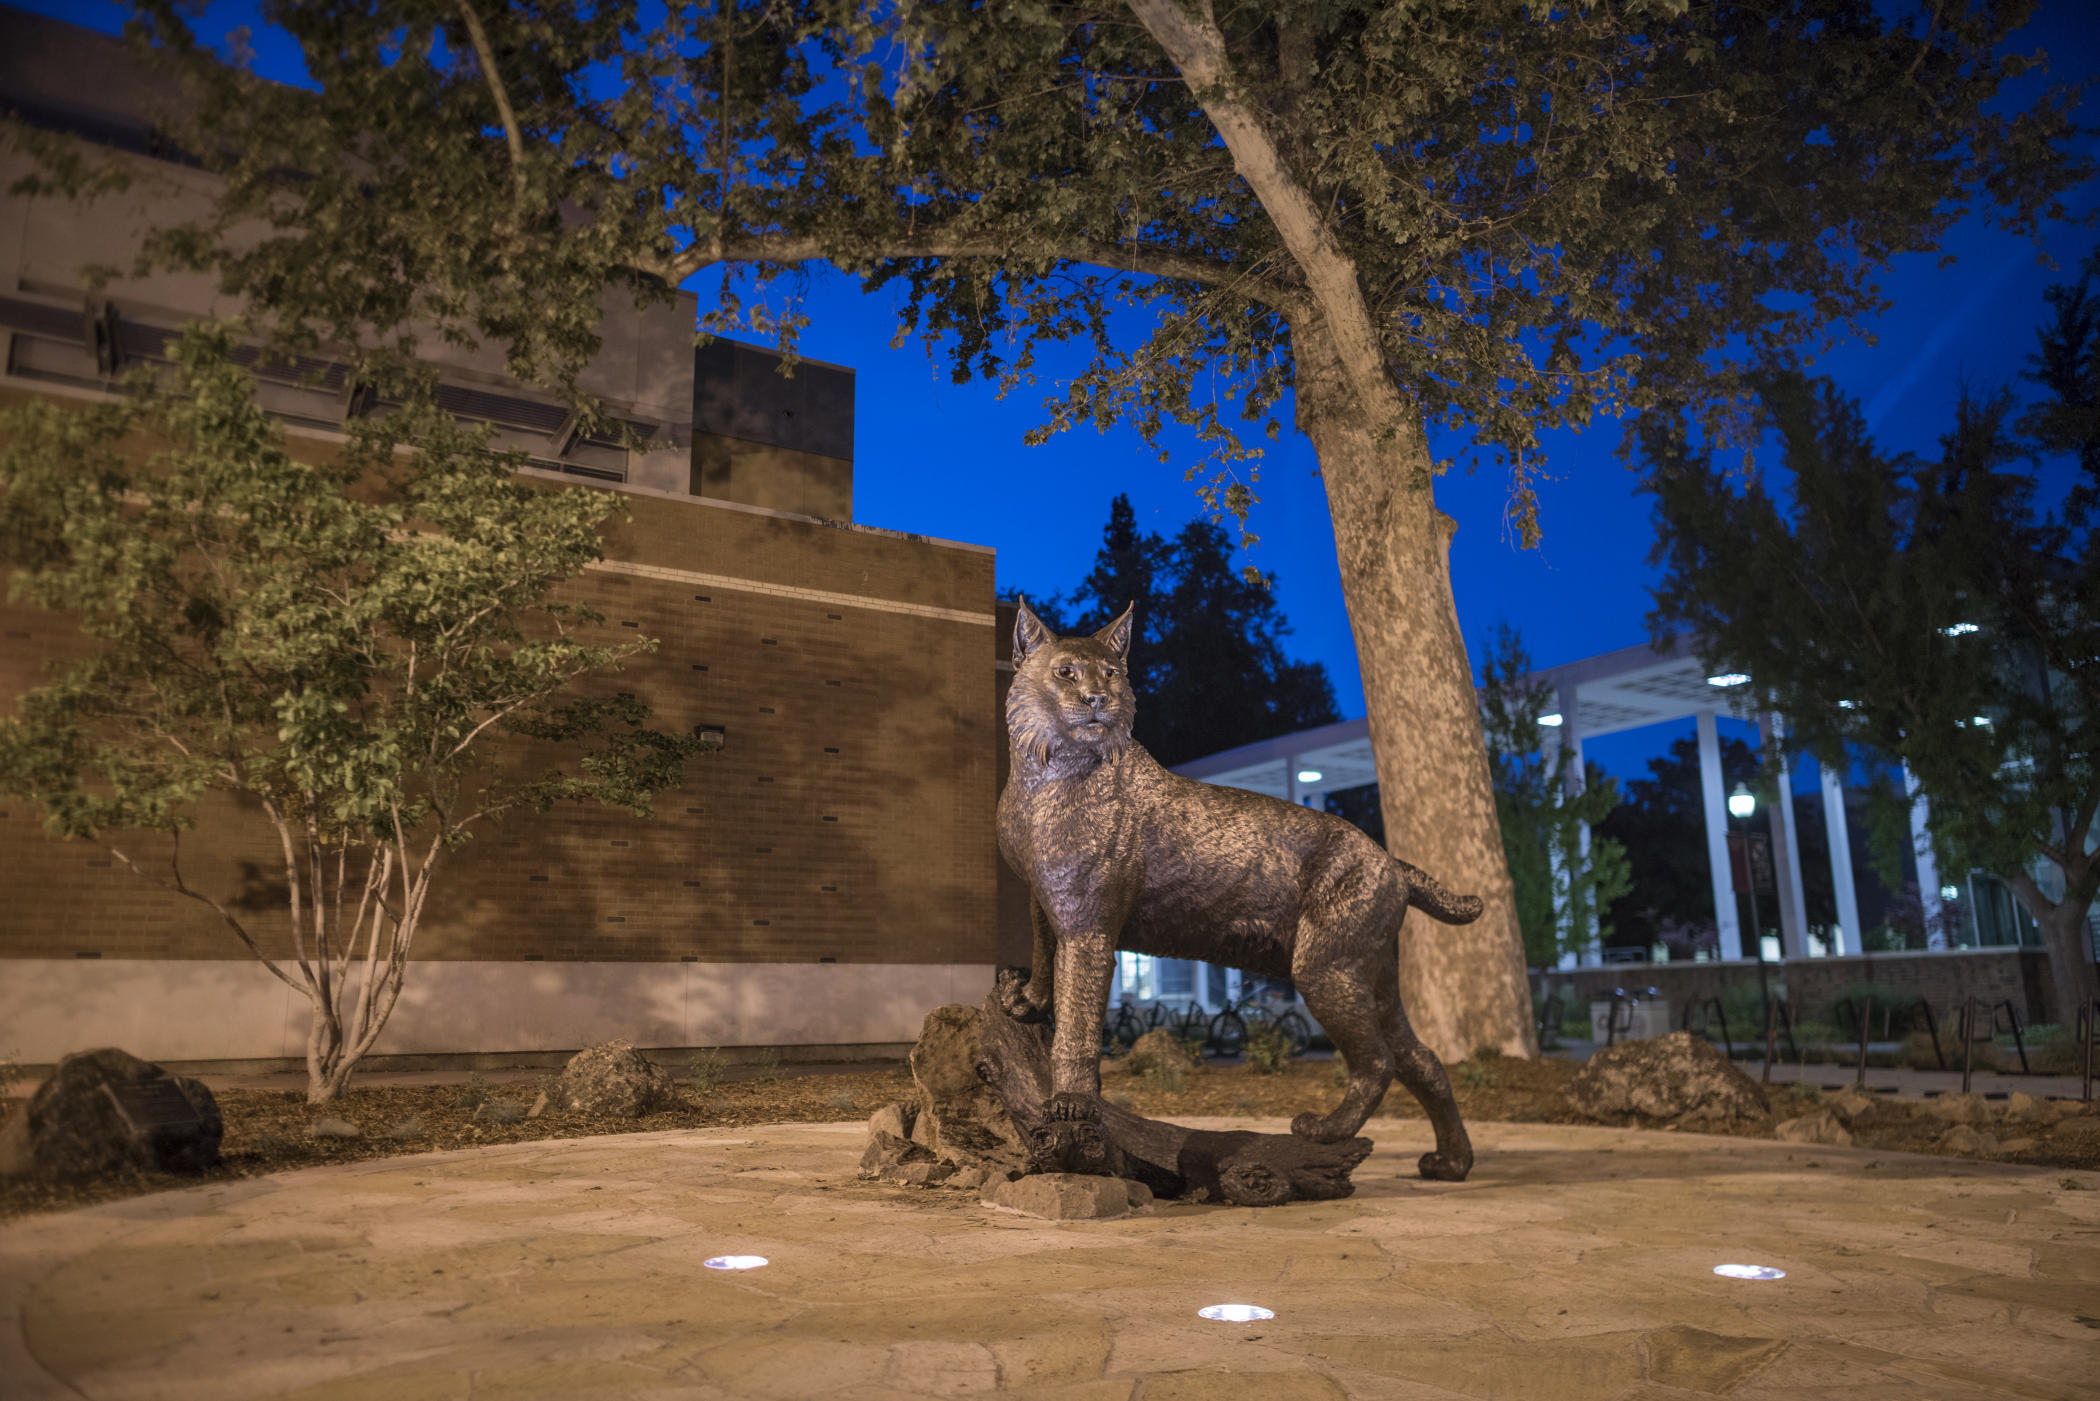 The Wildcat Statue stands proudly in Wildcat Plaza during spring evening.